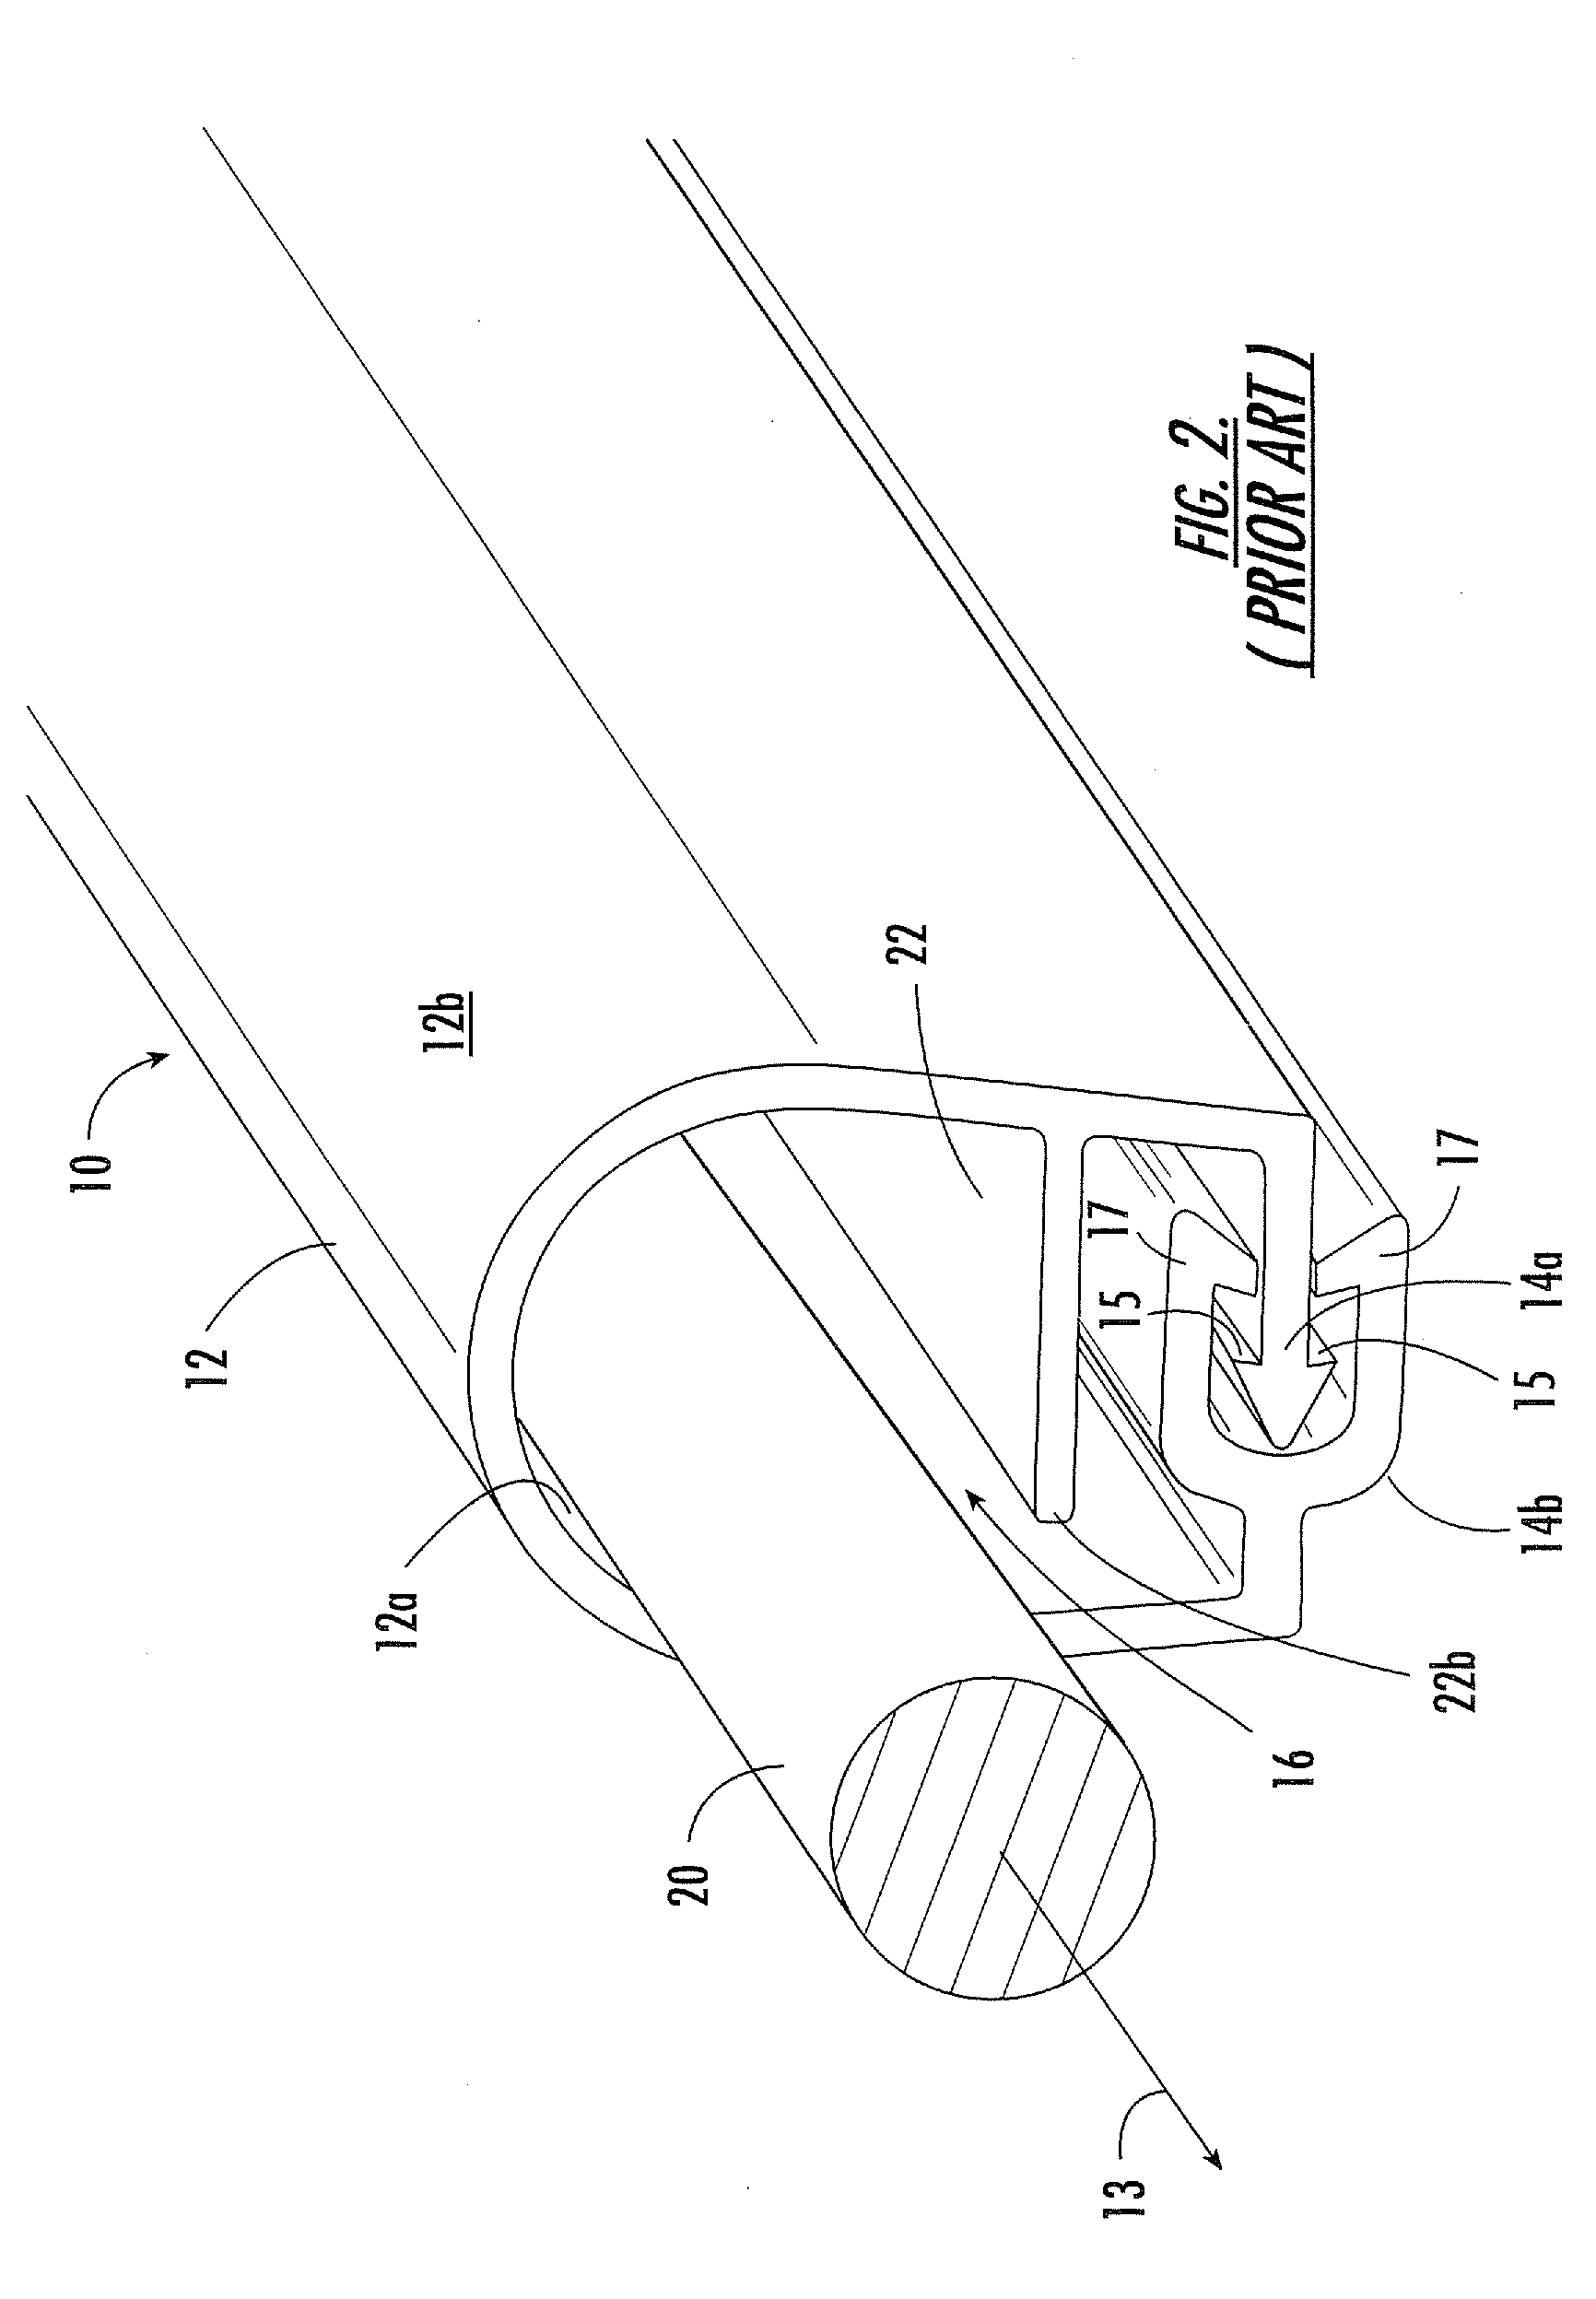 Hand-held apparatus for installing flashover protection covers on energized electrical conductors